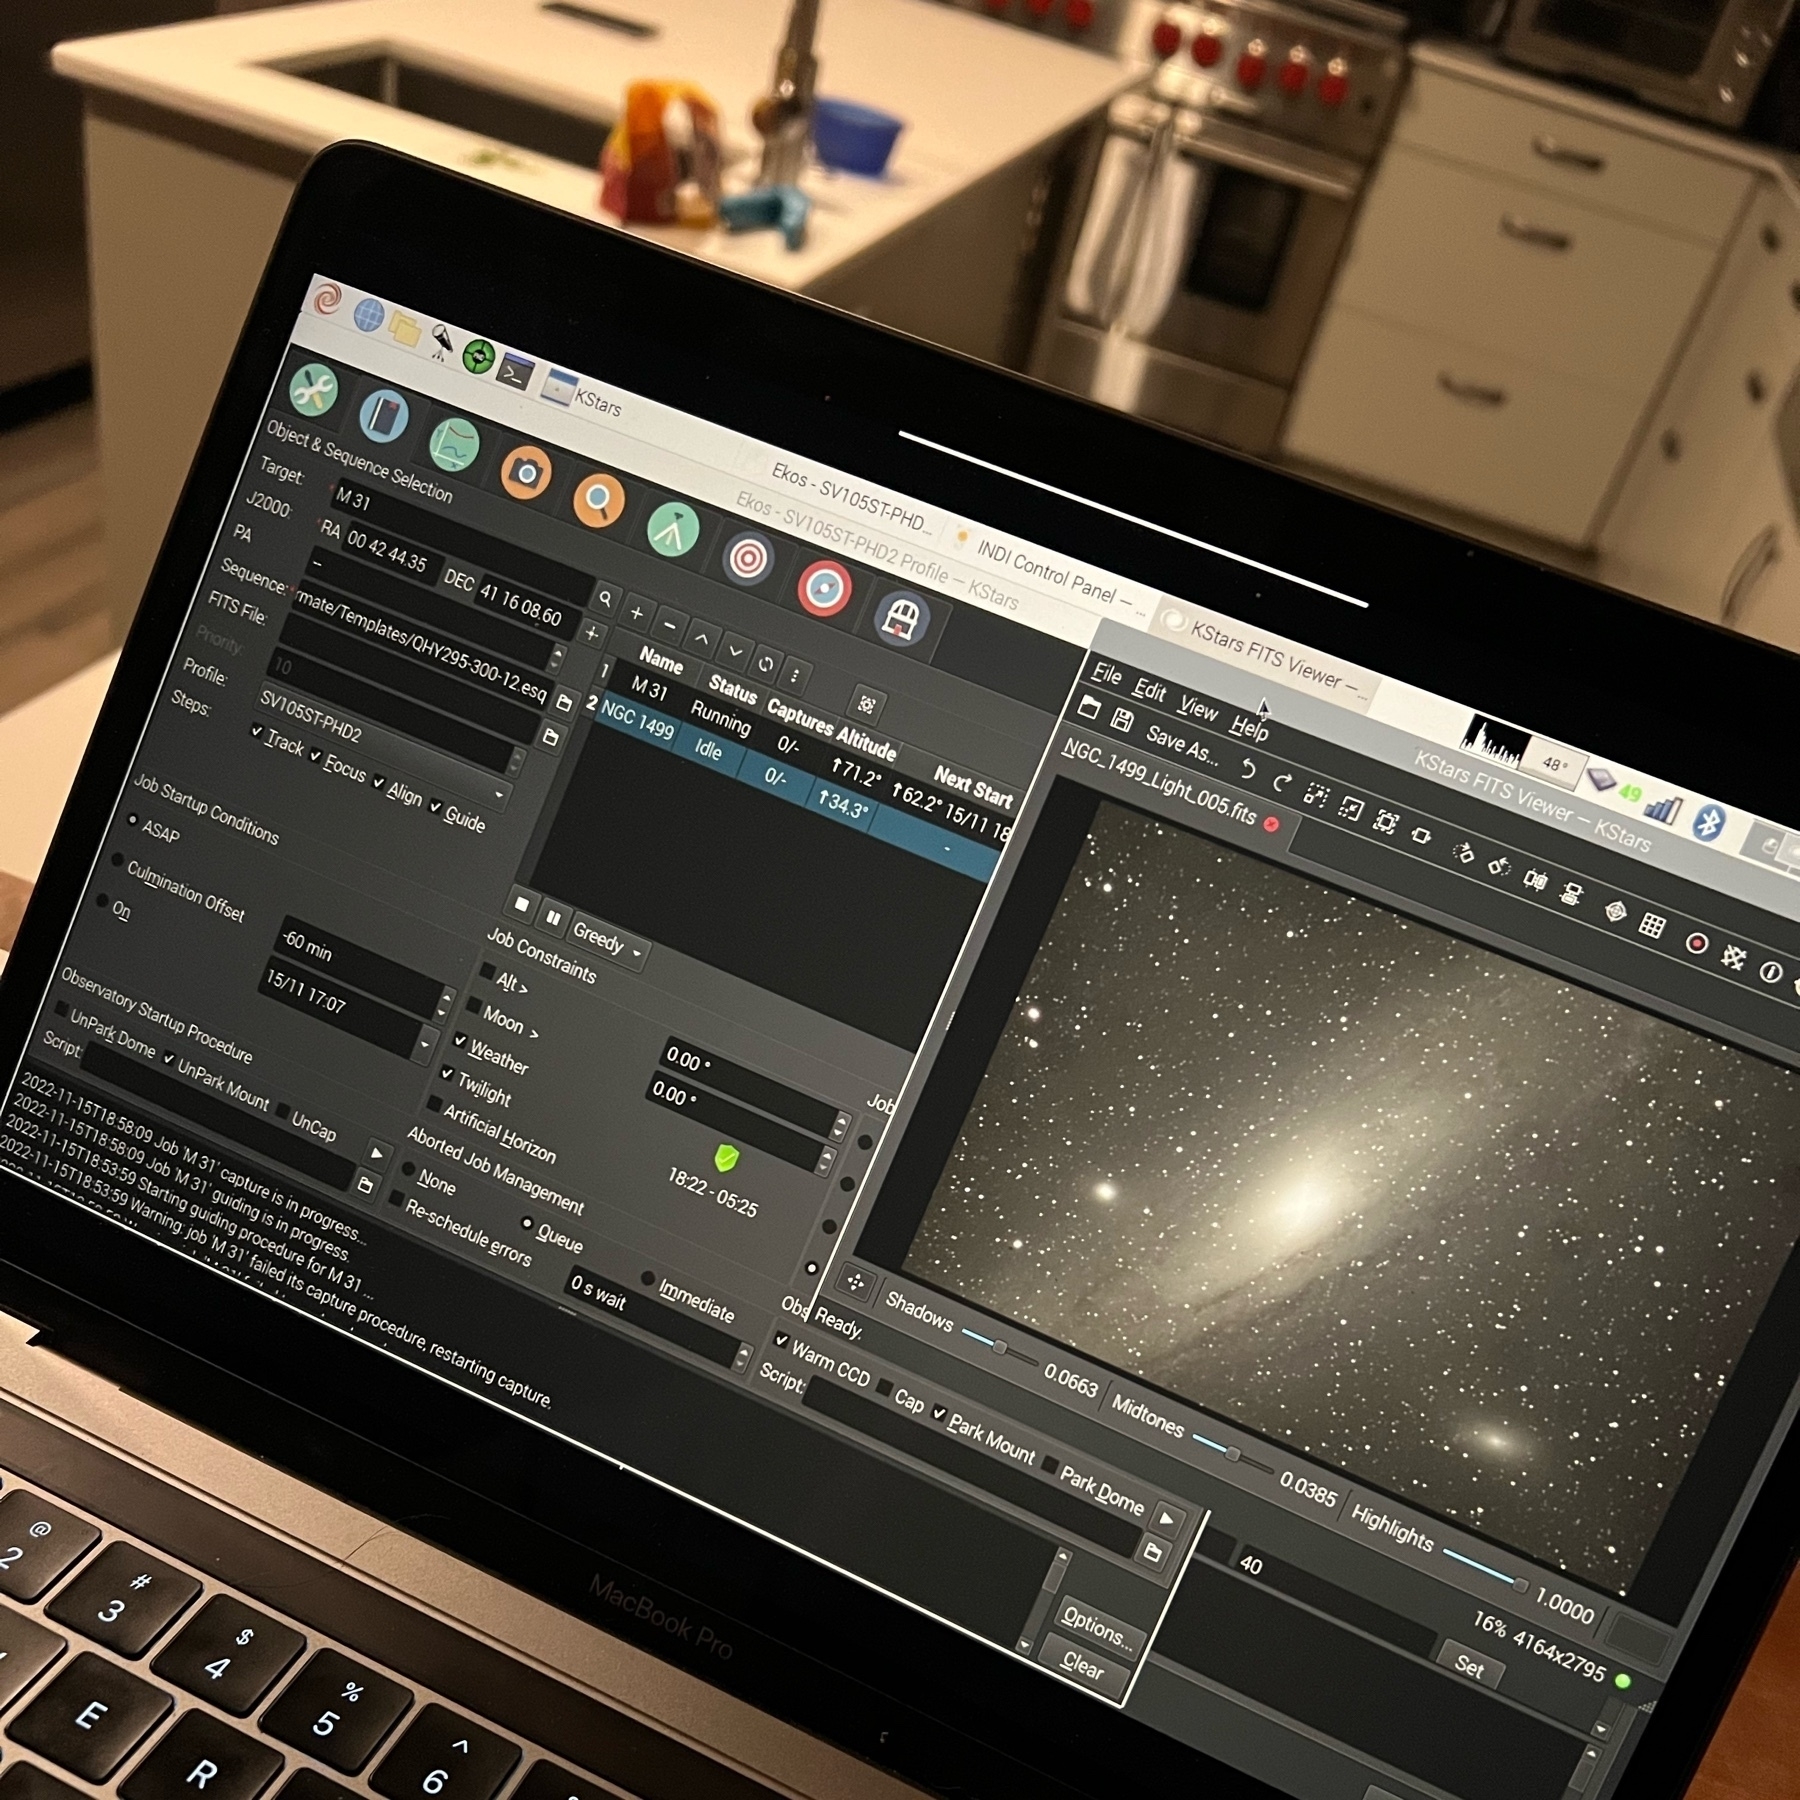 Andromeda galaxy in astrophotography software